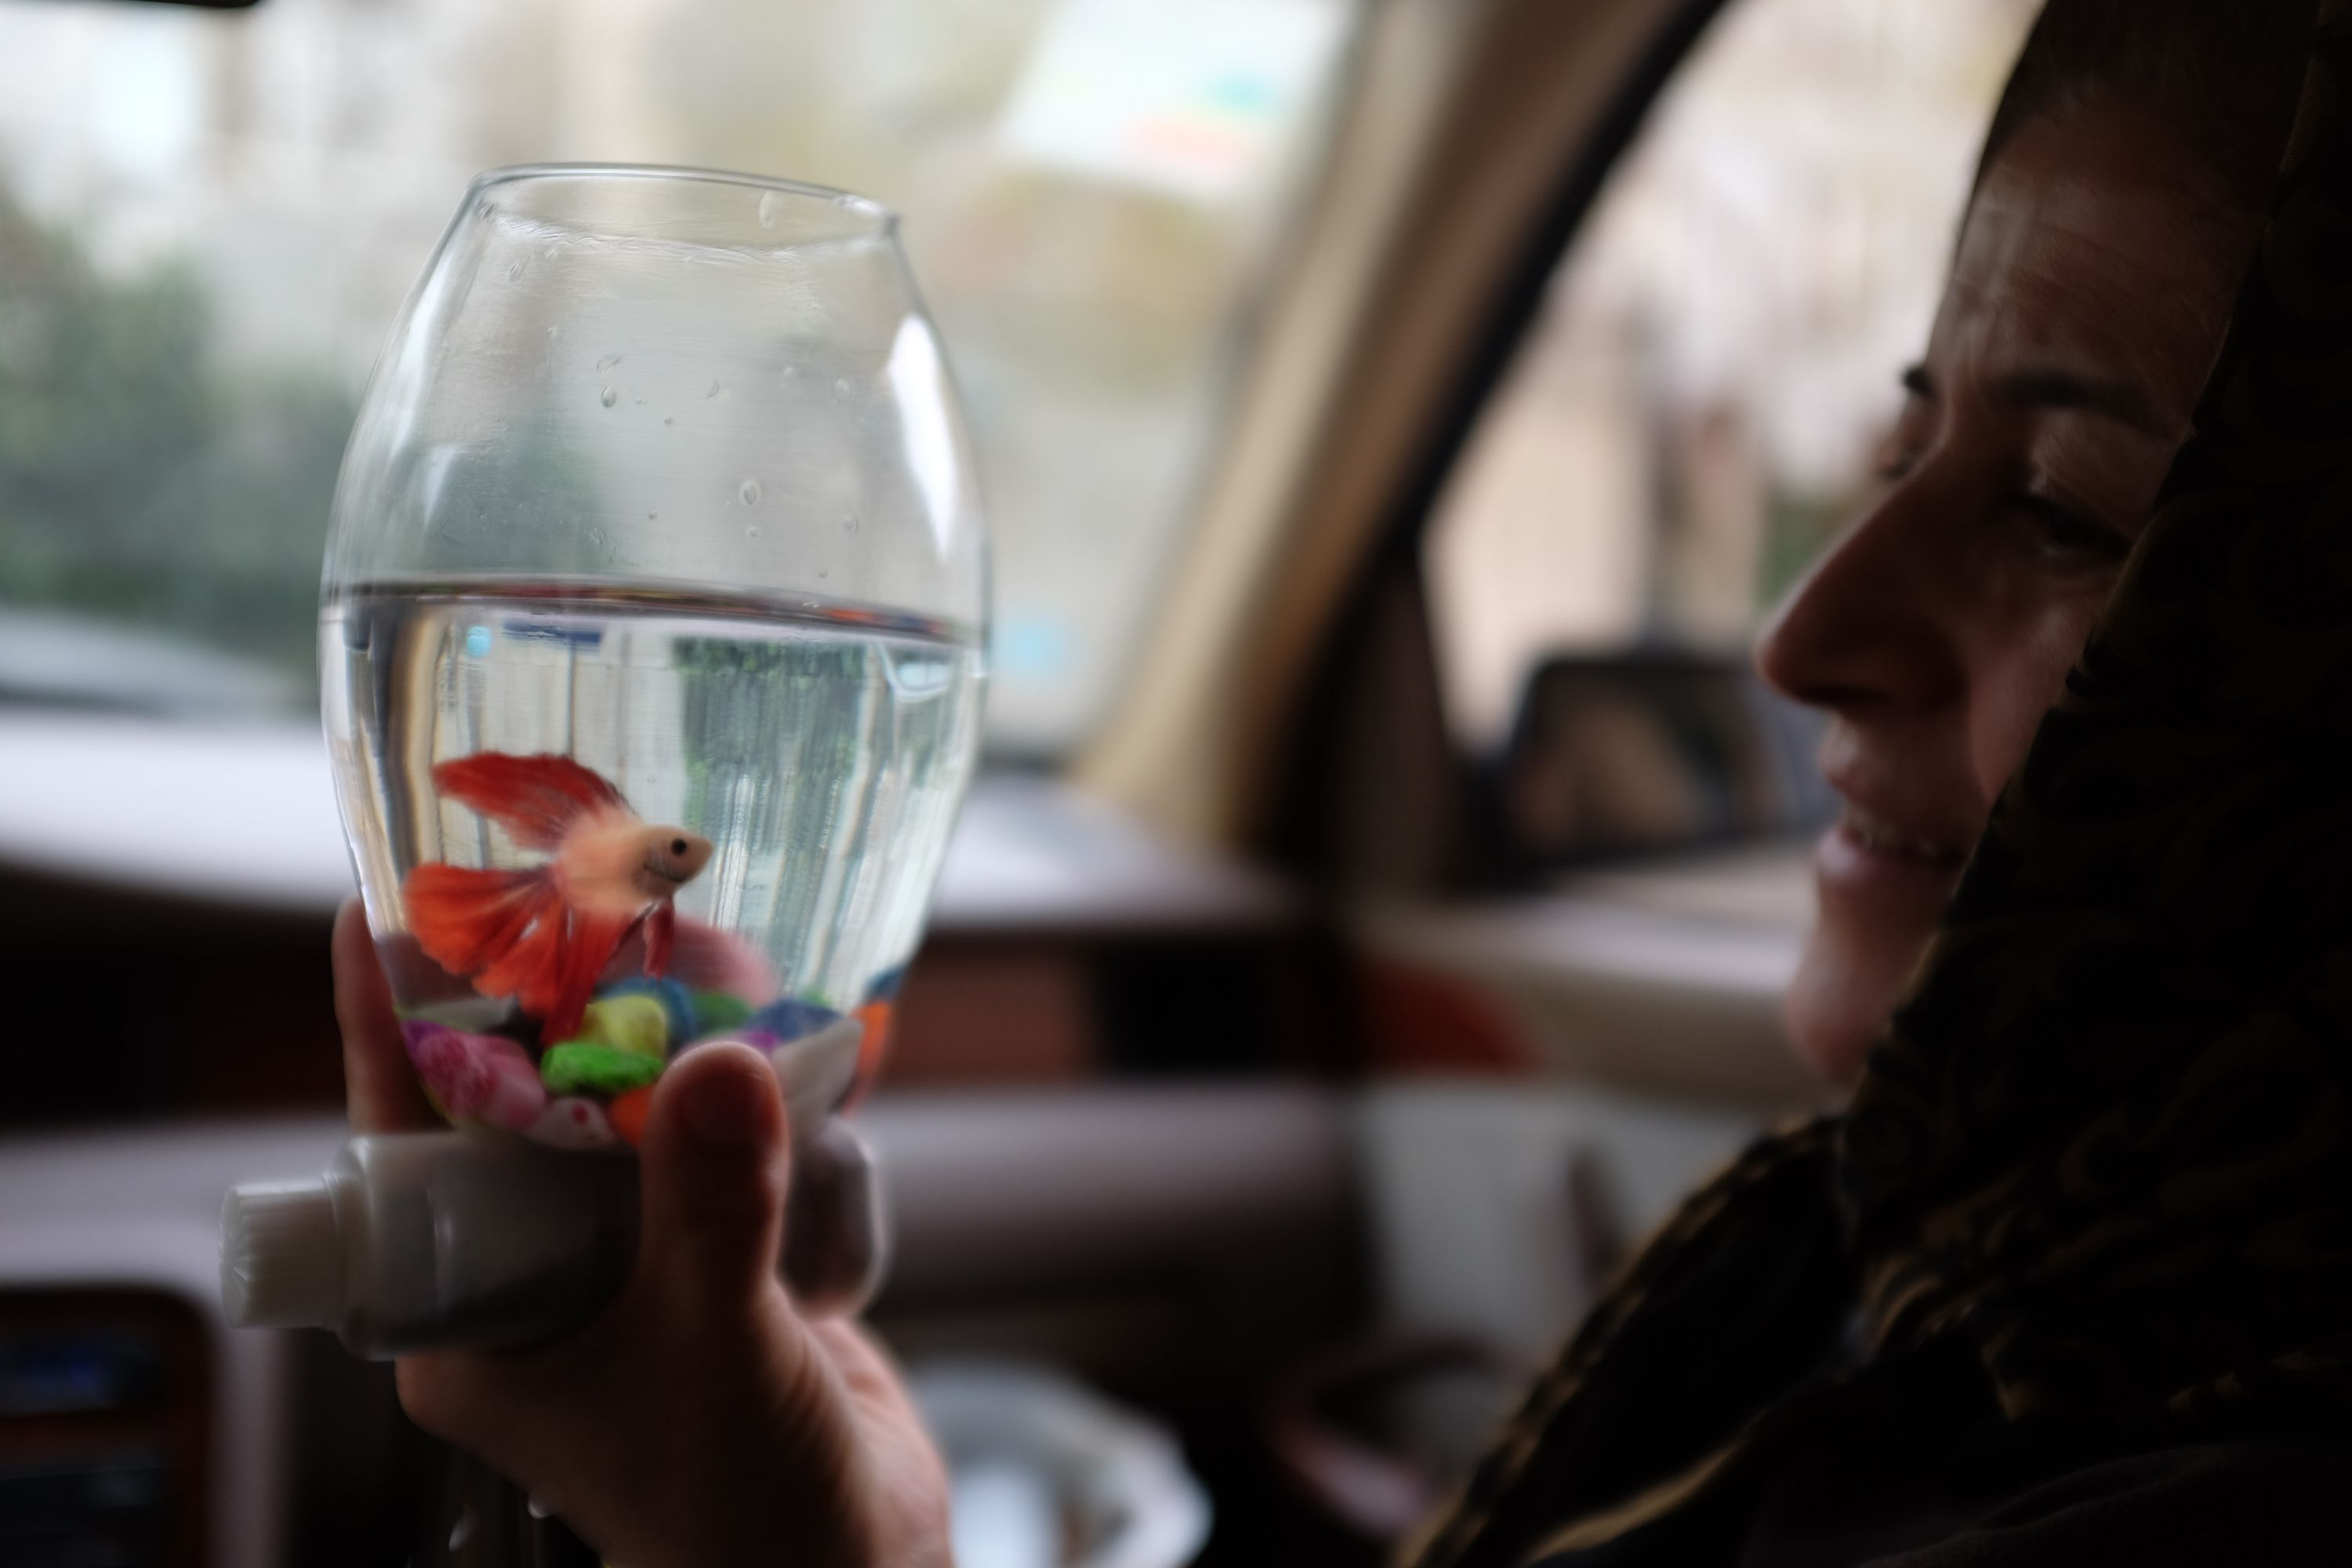 A woman wearing a headscarf, sitting in the passenger seat of a car, holds up a goldfish in a glass.